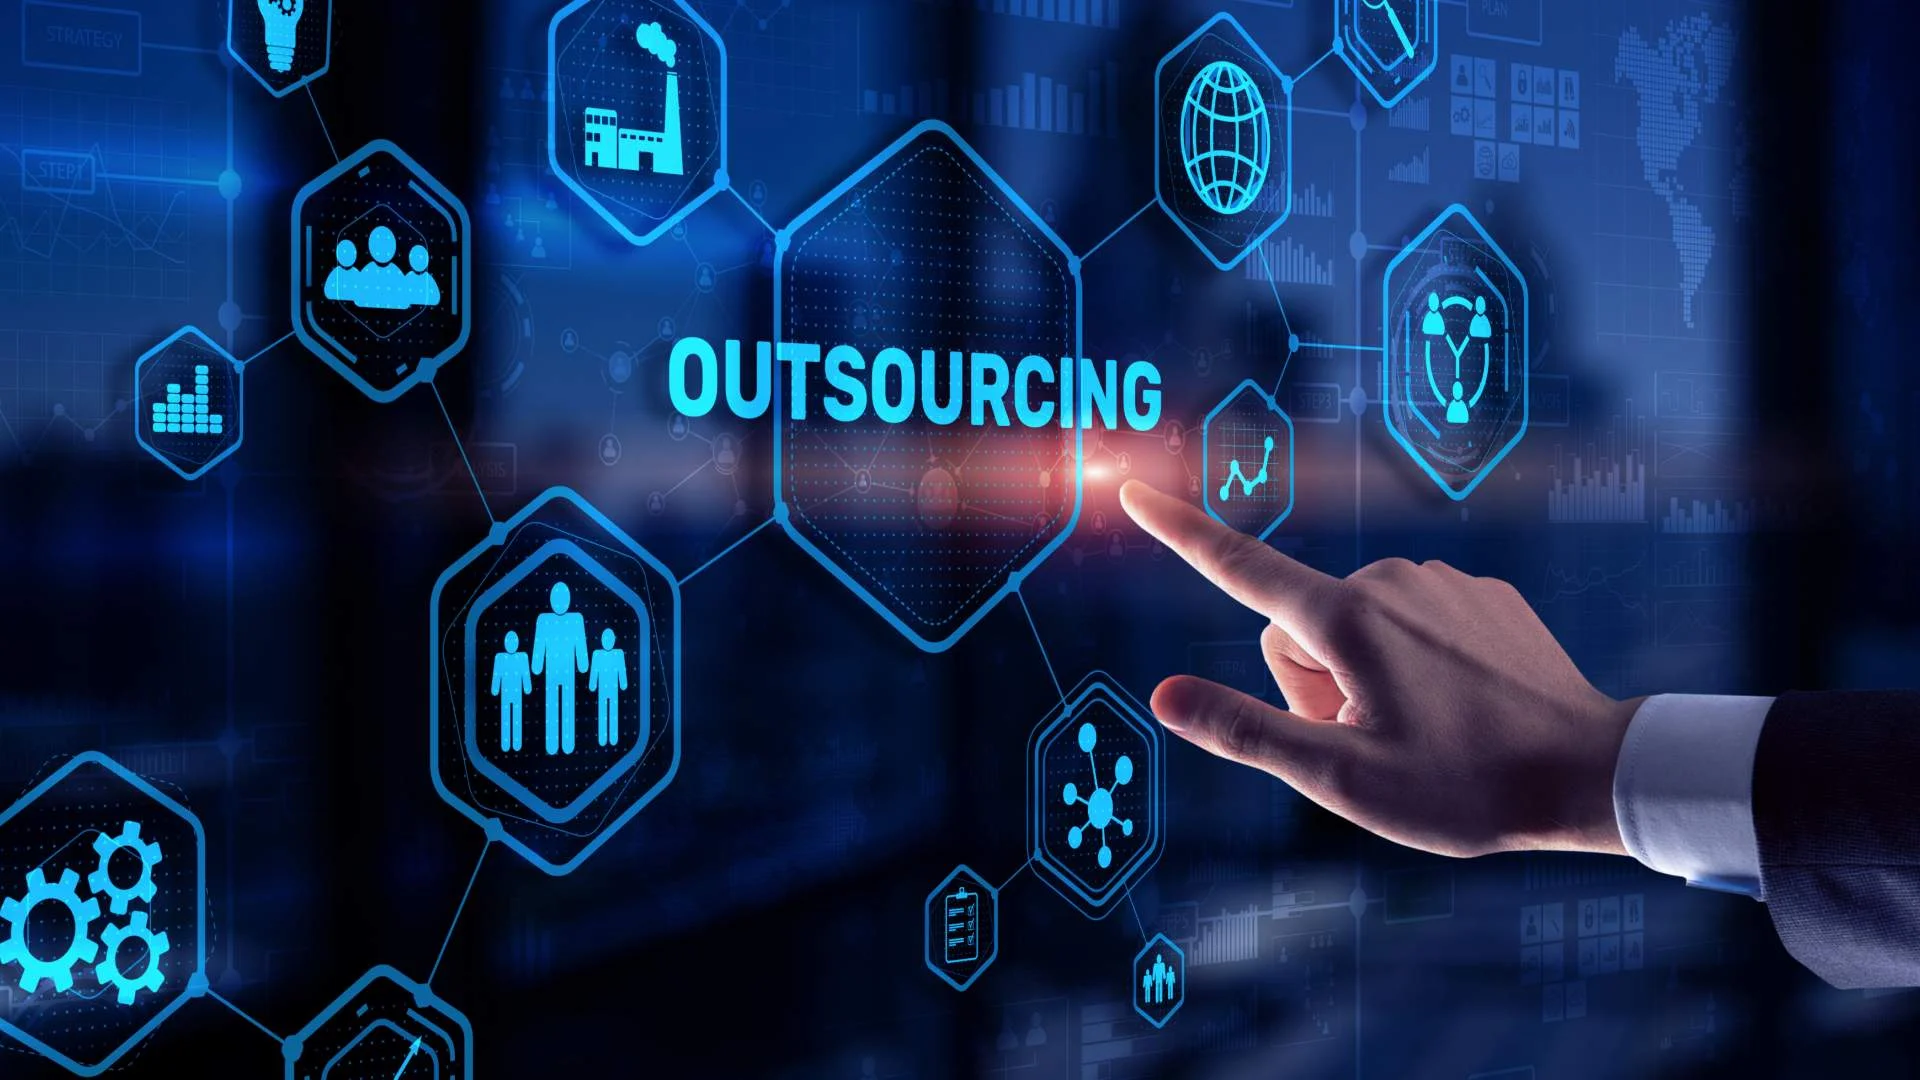 Confused about Global outsourcing? This is for you